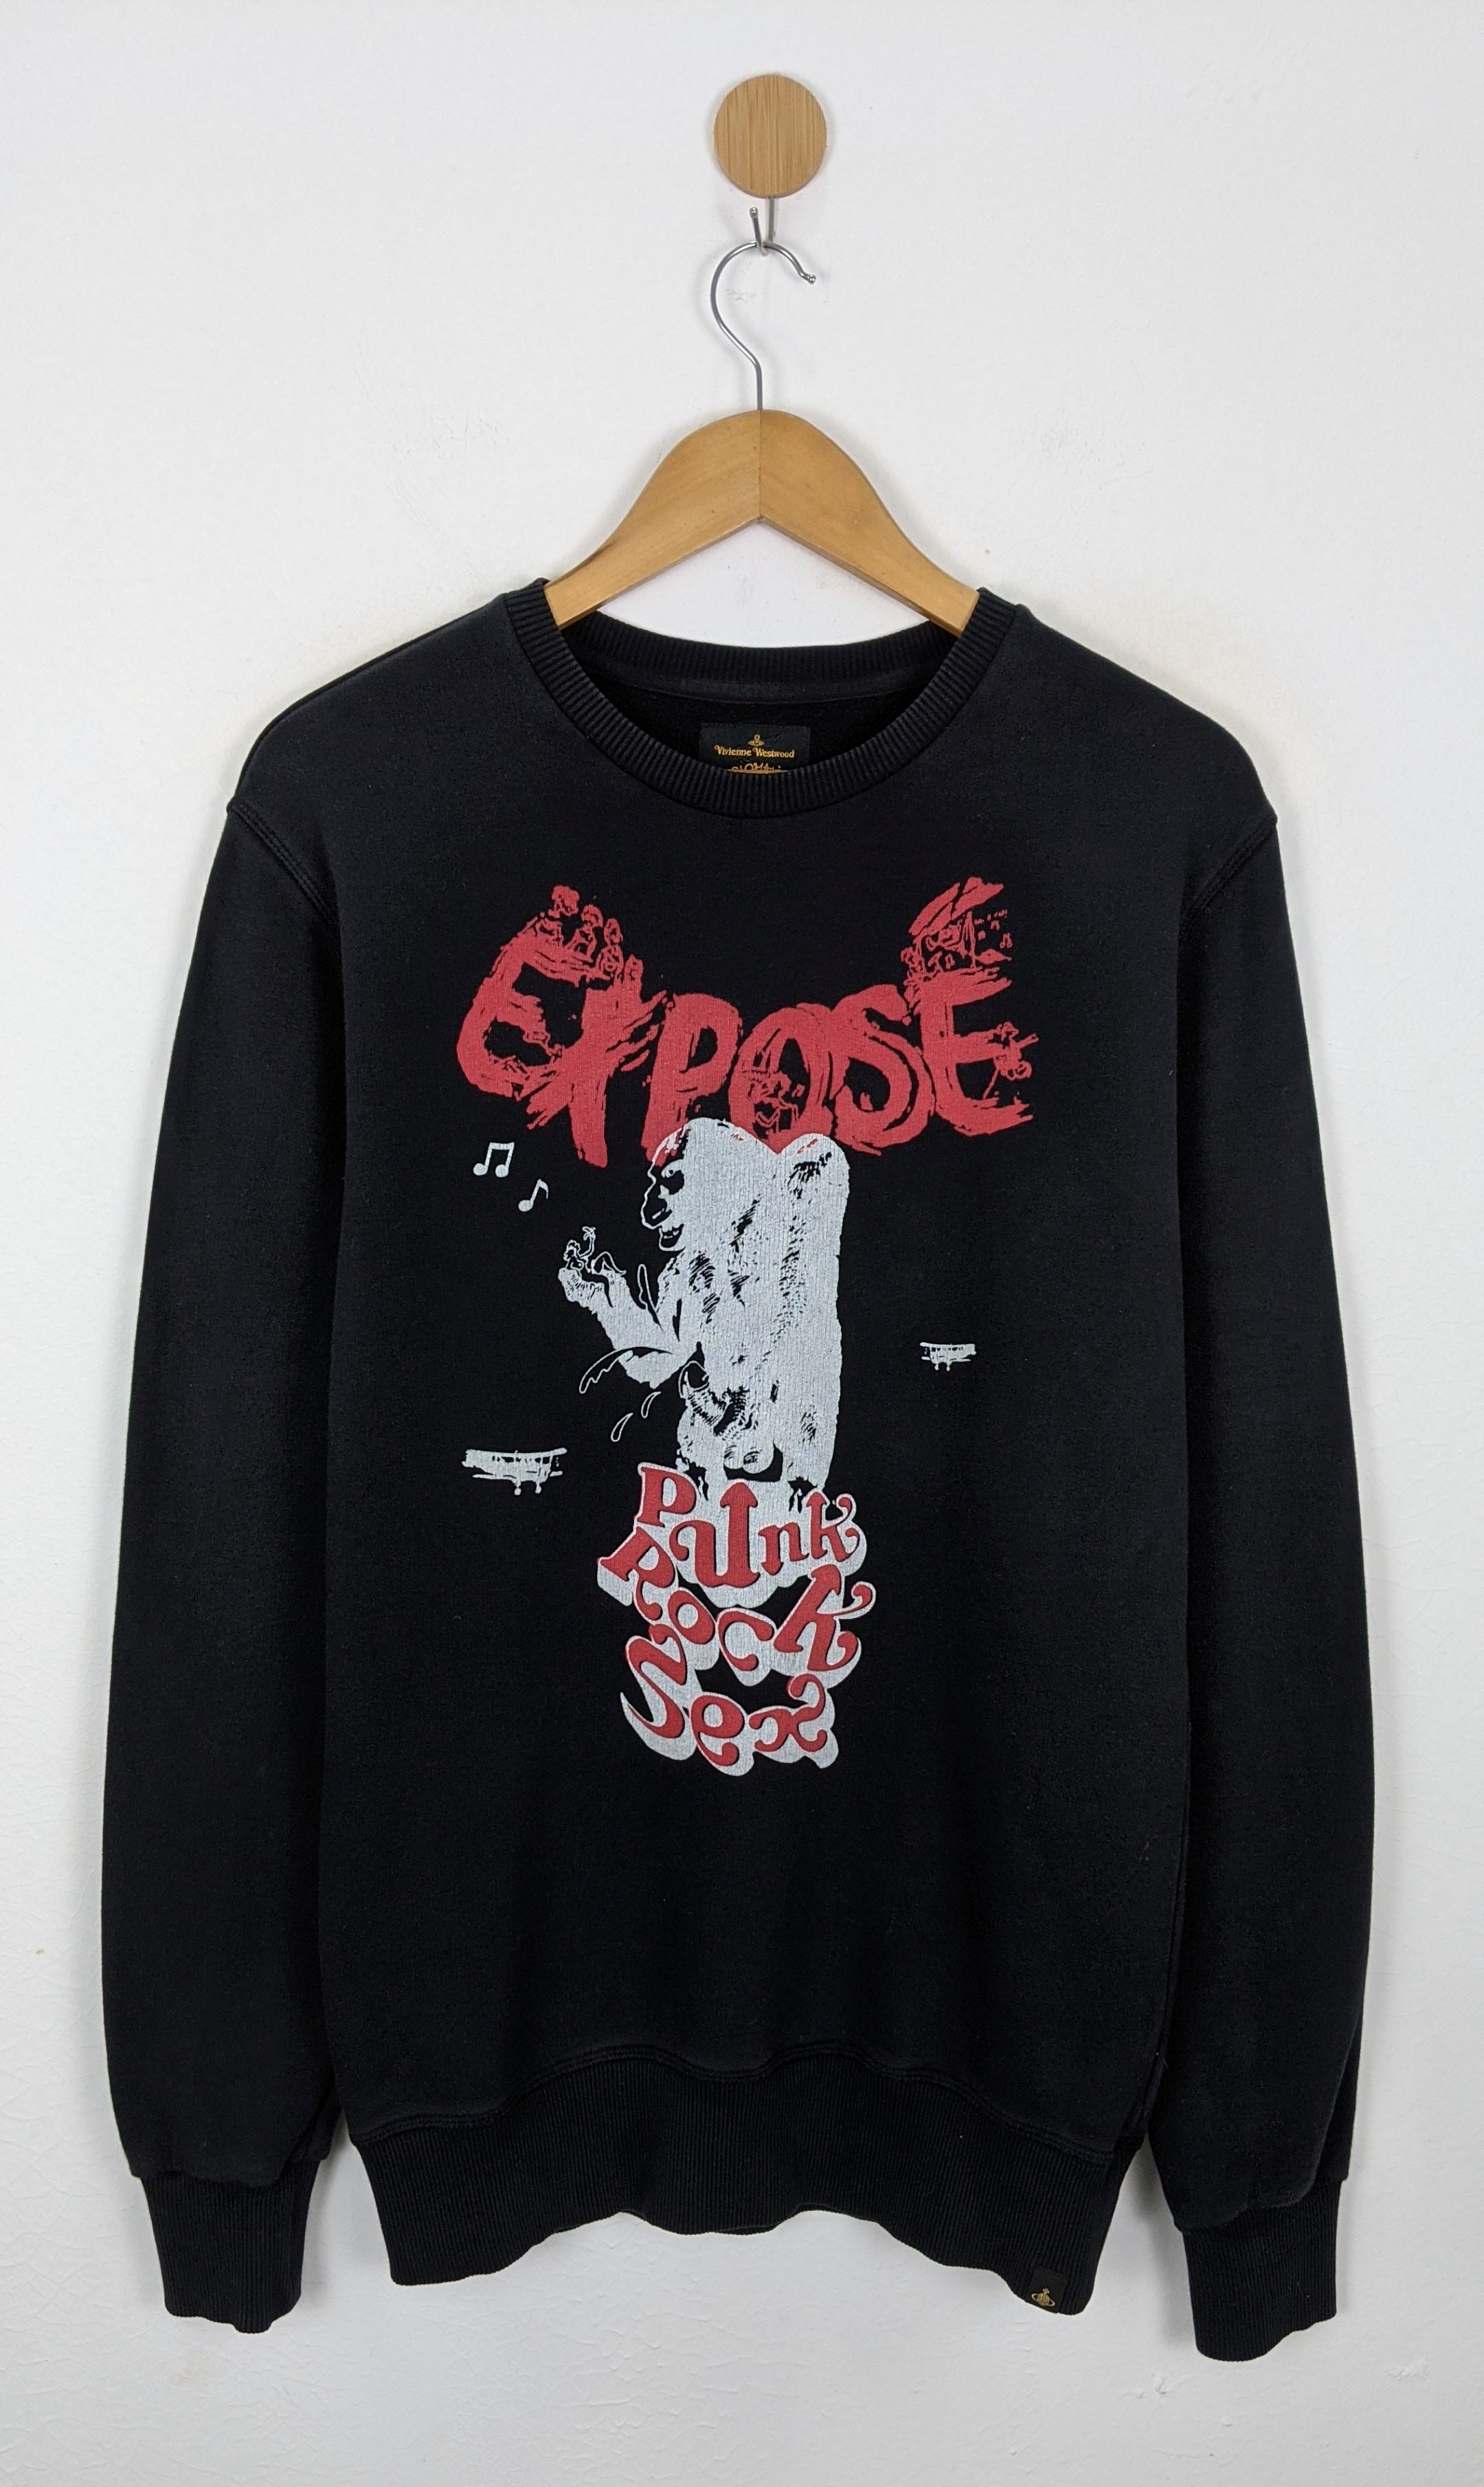 Vivienne Westwood Anglomania Expose Punk Rock Sex sweat